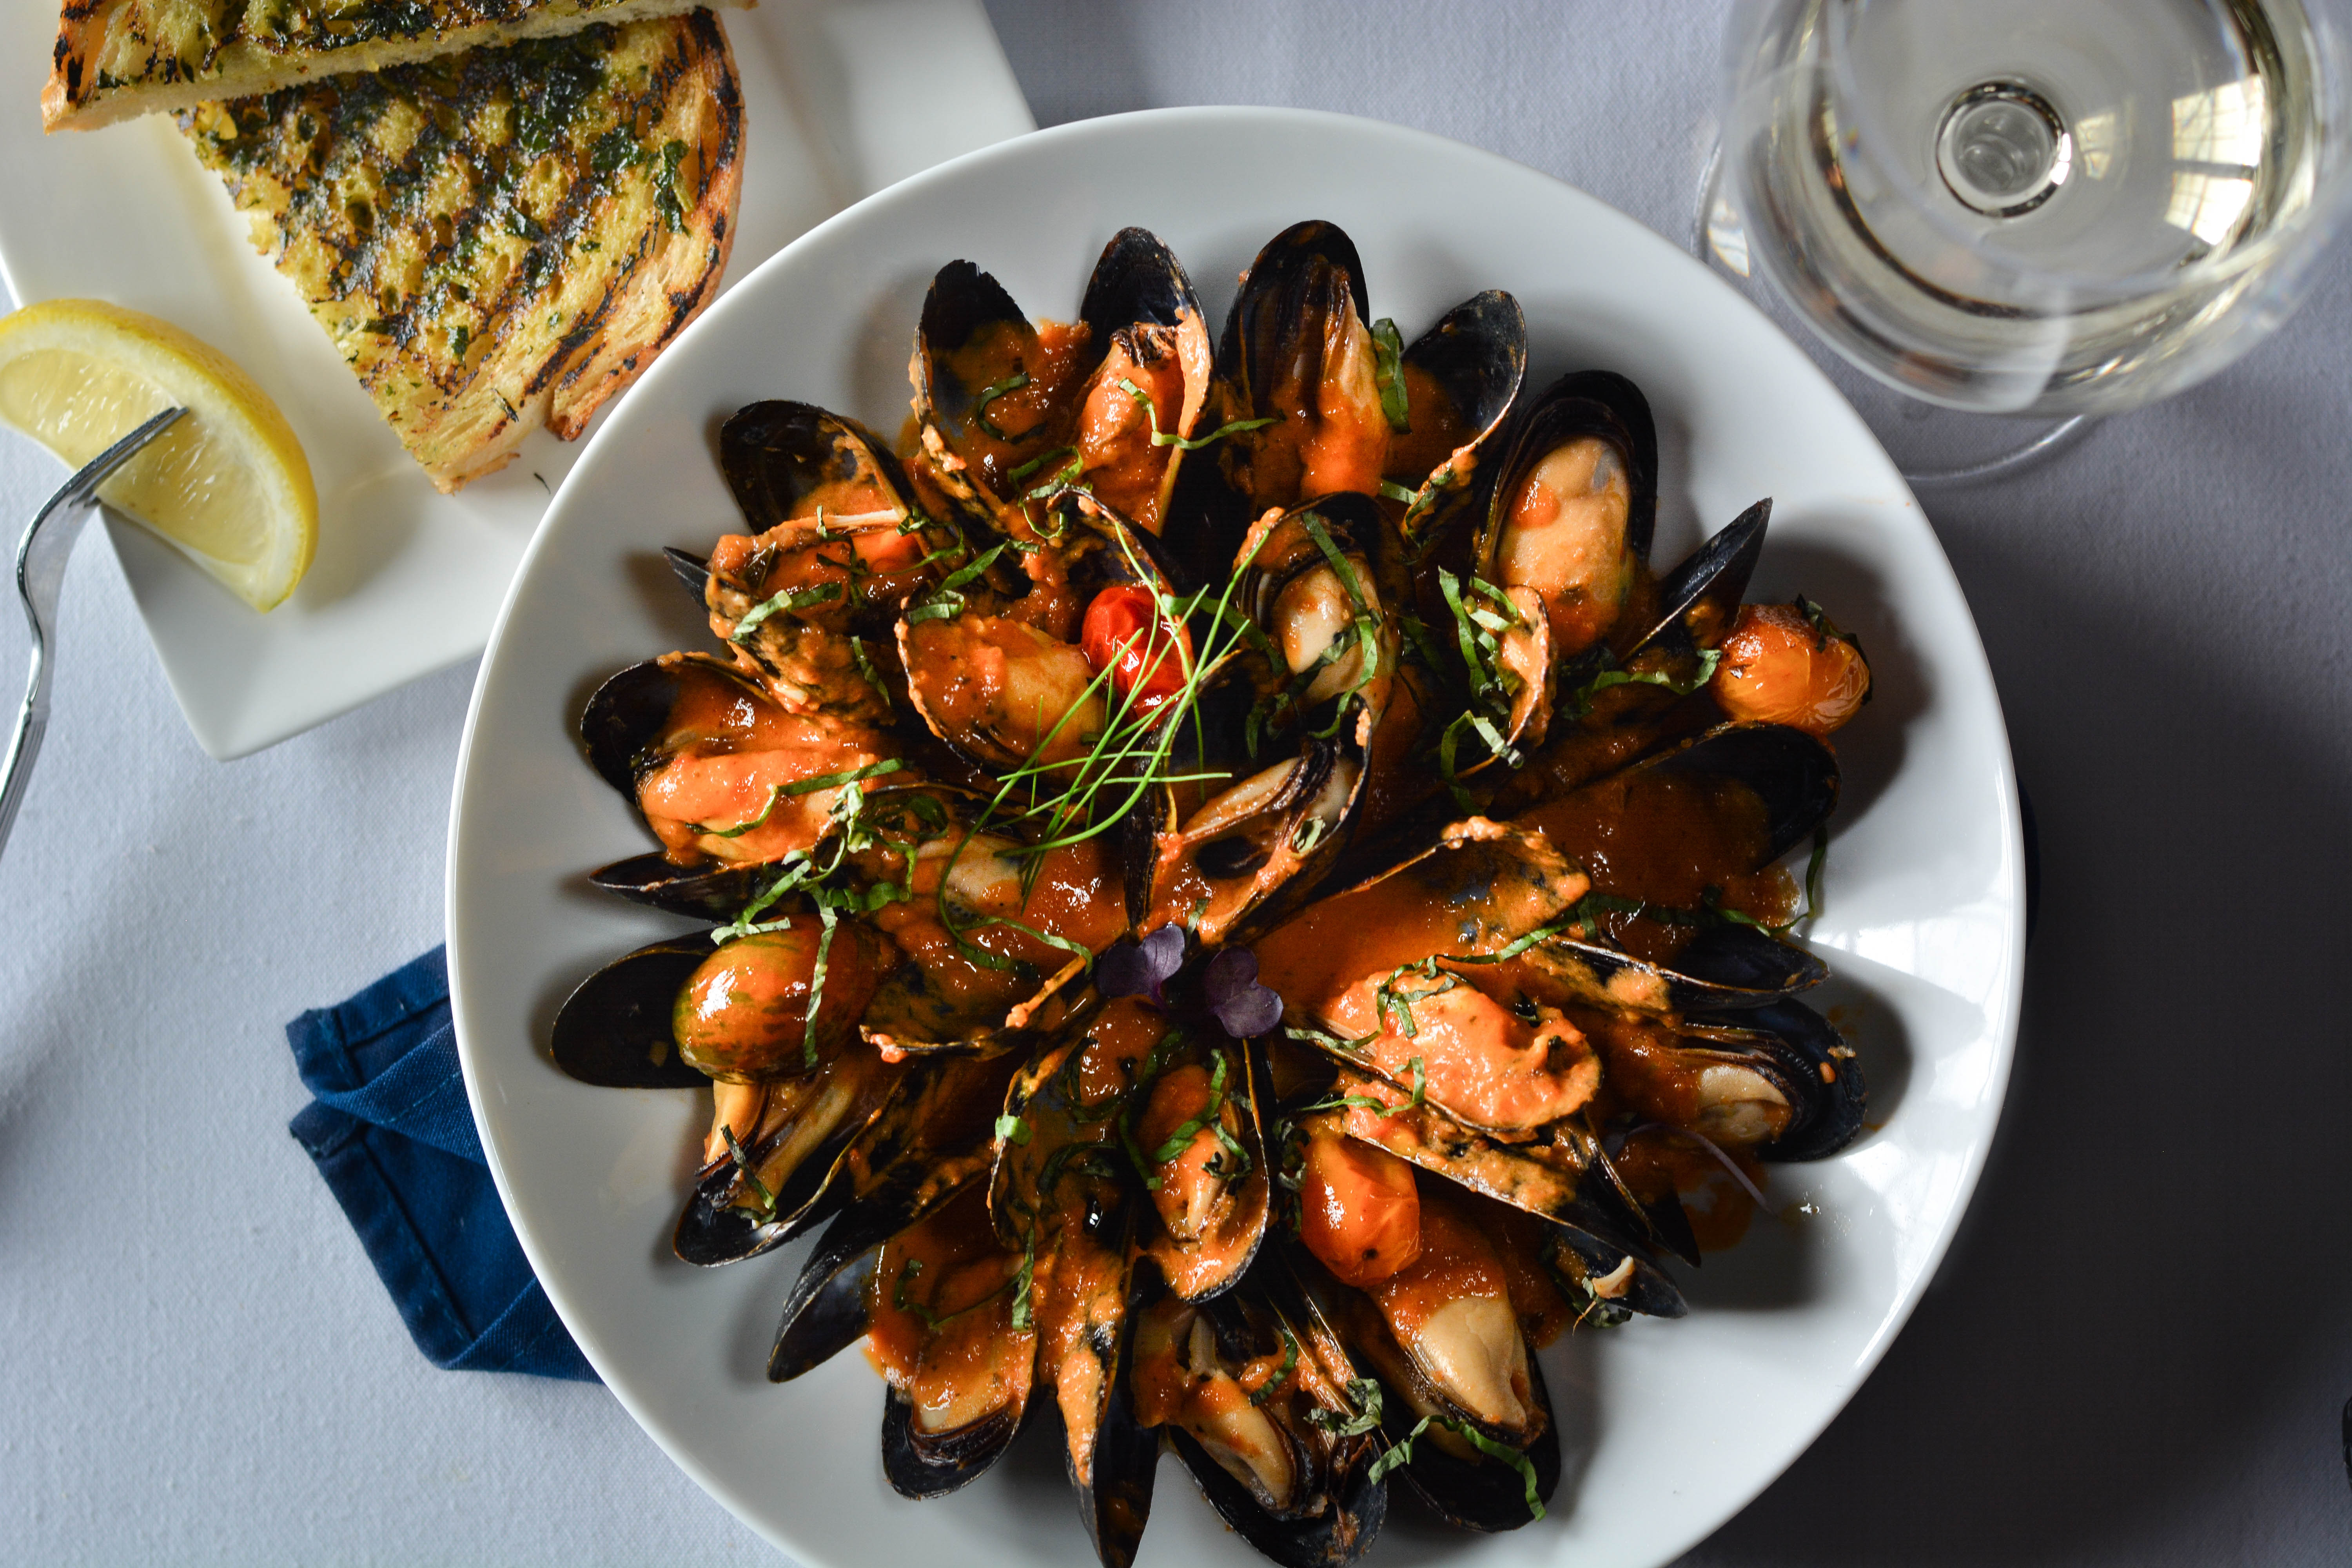 Mussels and more seafood options are available at Jag's all through the Lenten season